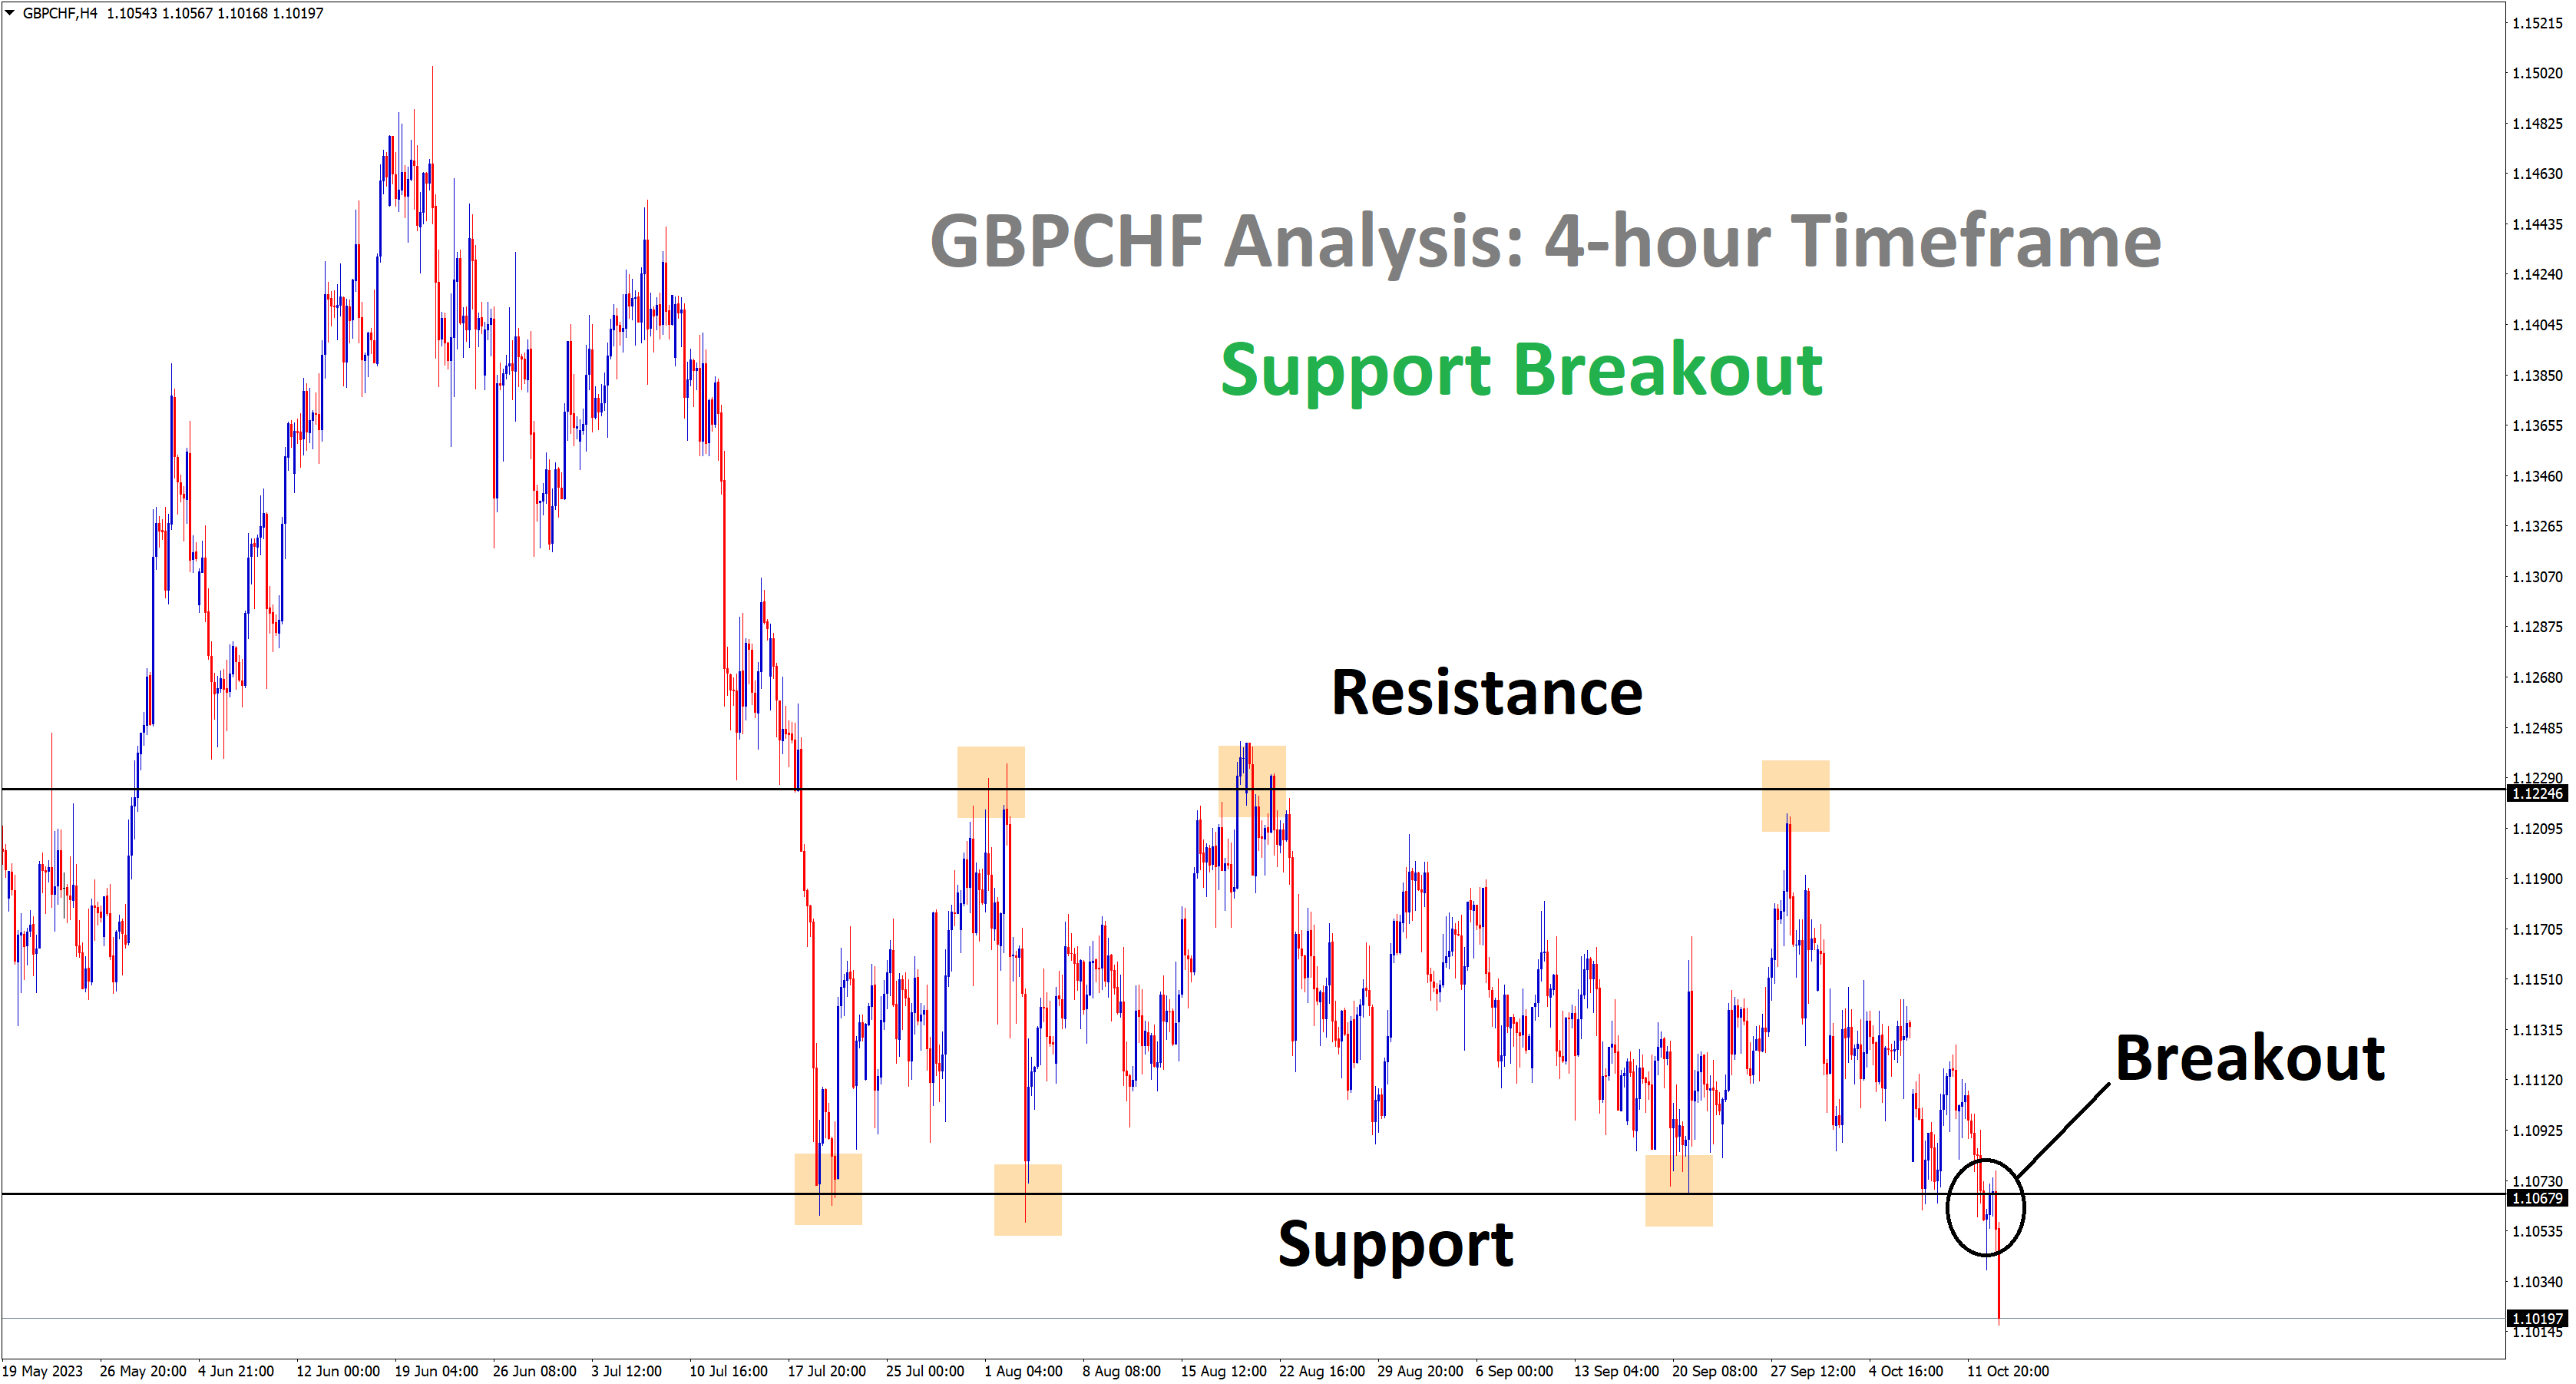 gbpchf broken the support